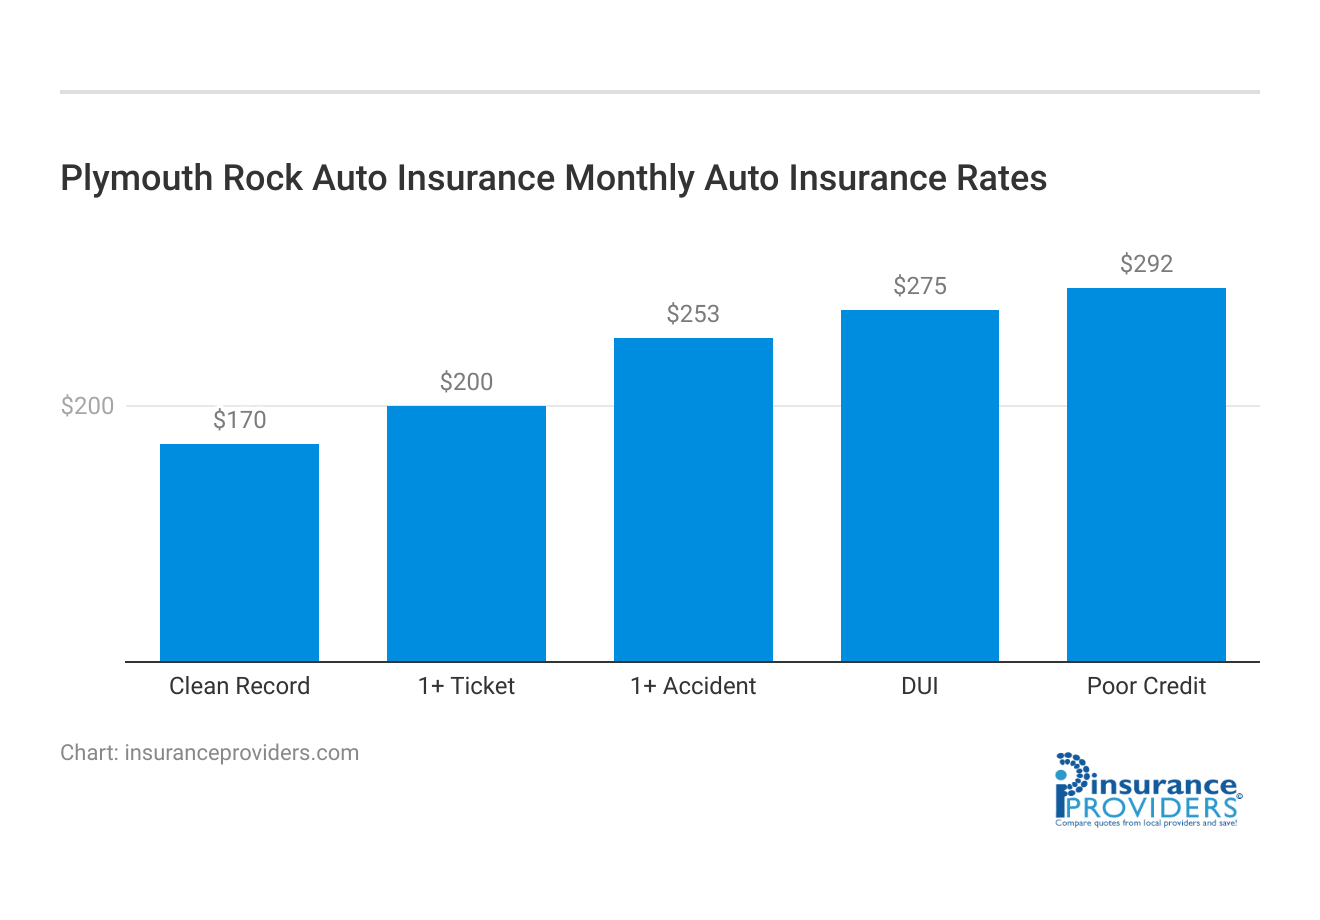 <h3>Plymouth Rock Auto Insurance Monthly Auto Insurance Rates</h3>